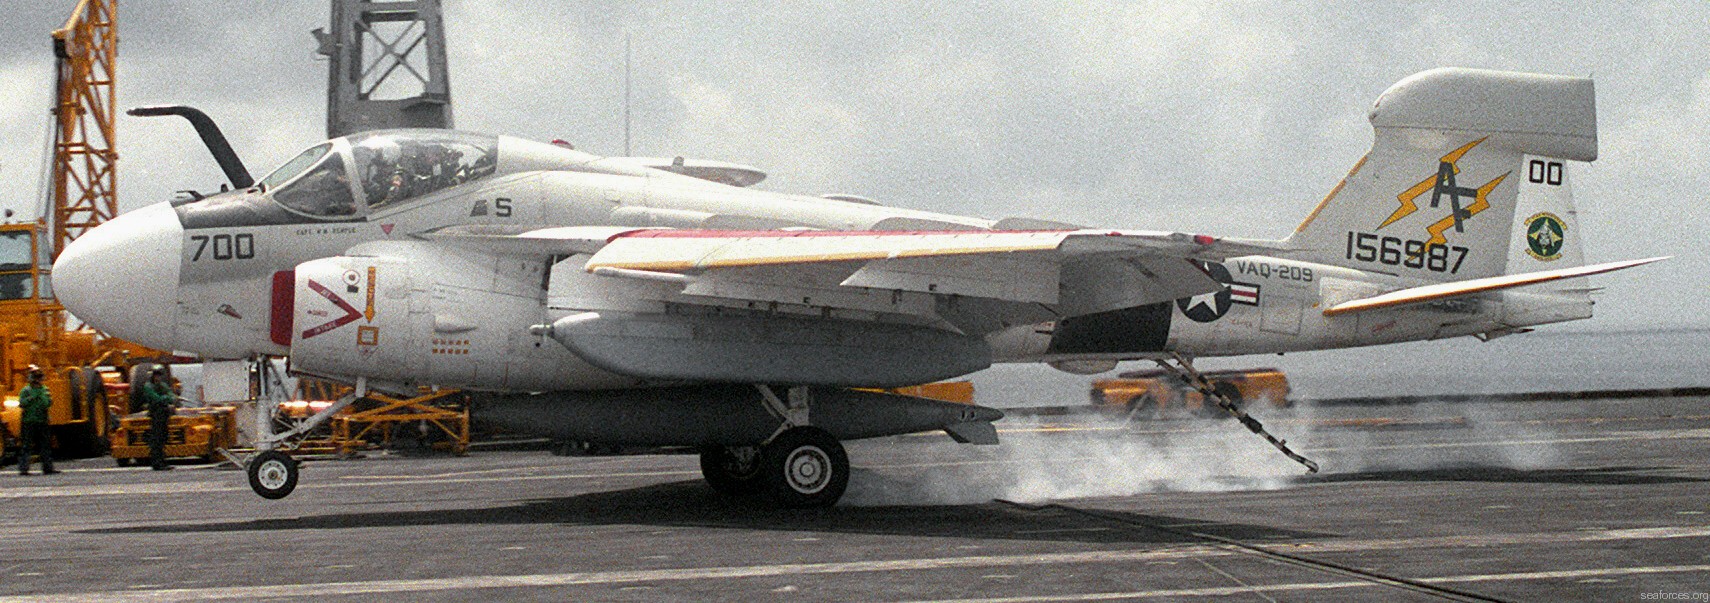 vaq-209 star warriors electronic attack squadron navy ea-6a electric intruder 37